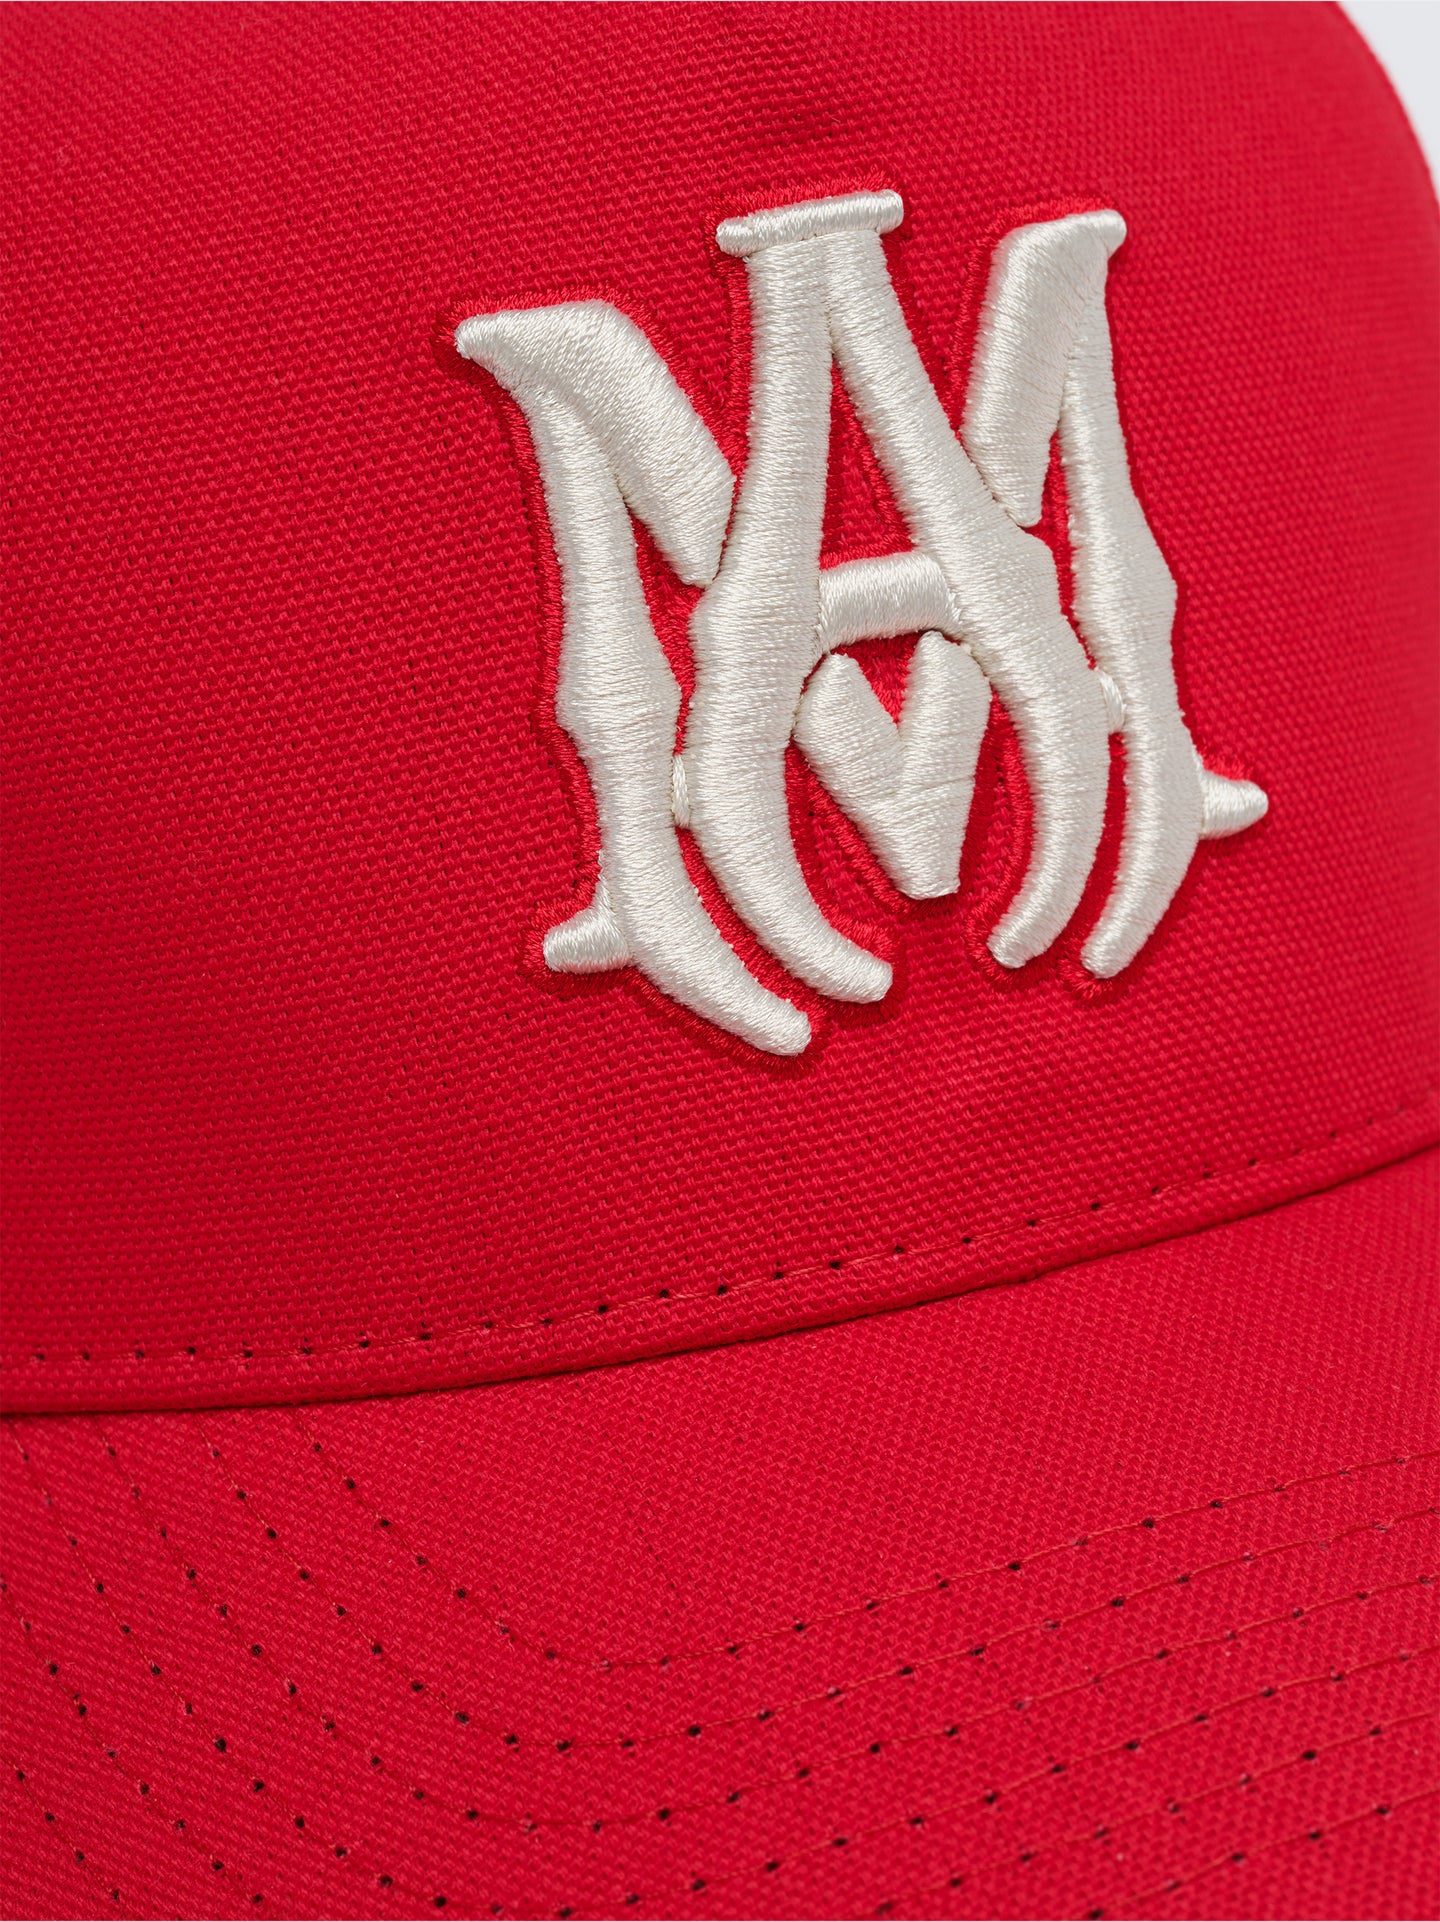 MA STAGGERED AMIRI FULL CANVAS HAT - Red